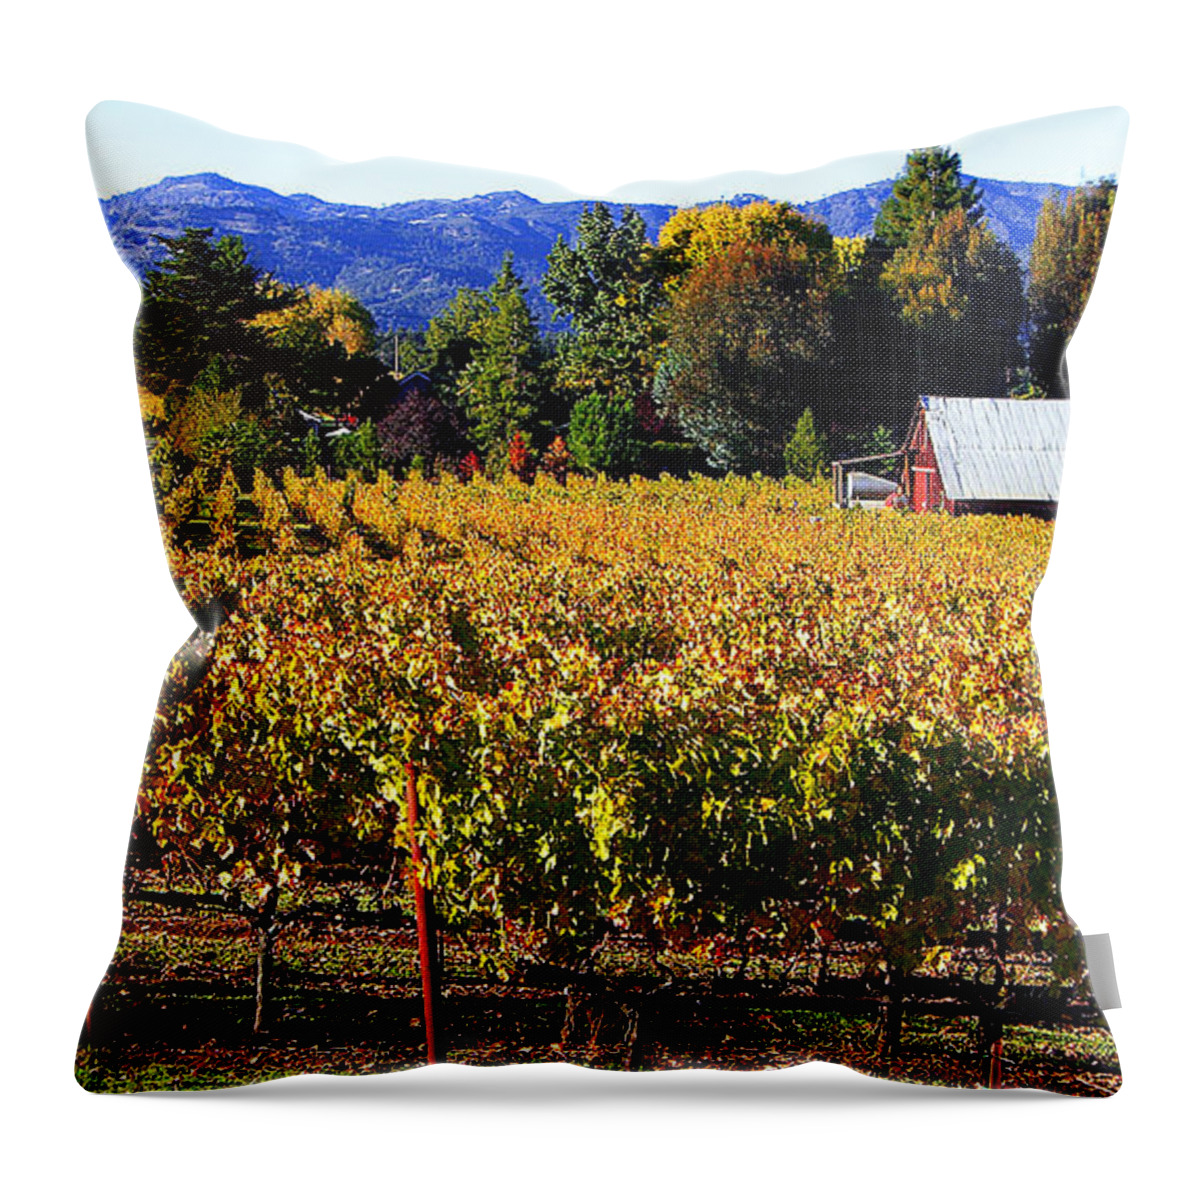 Napa Valley Throw Pillow featuring the photograph Vineyard 4 by Xueling Zou